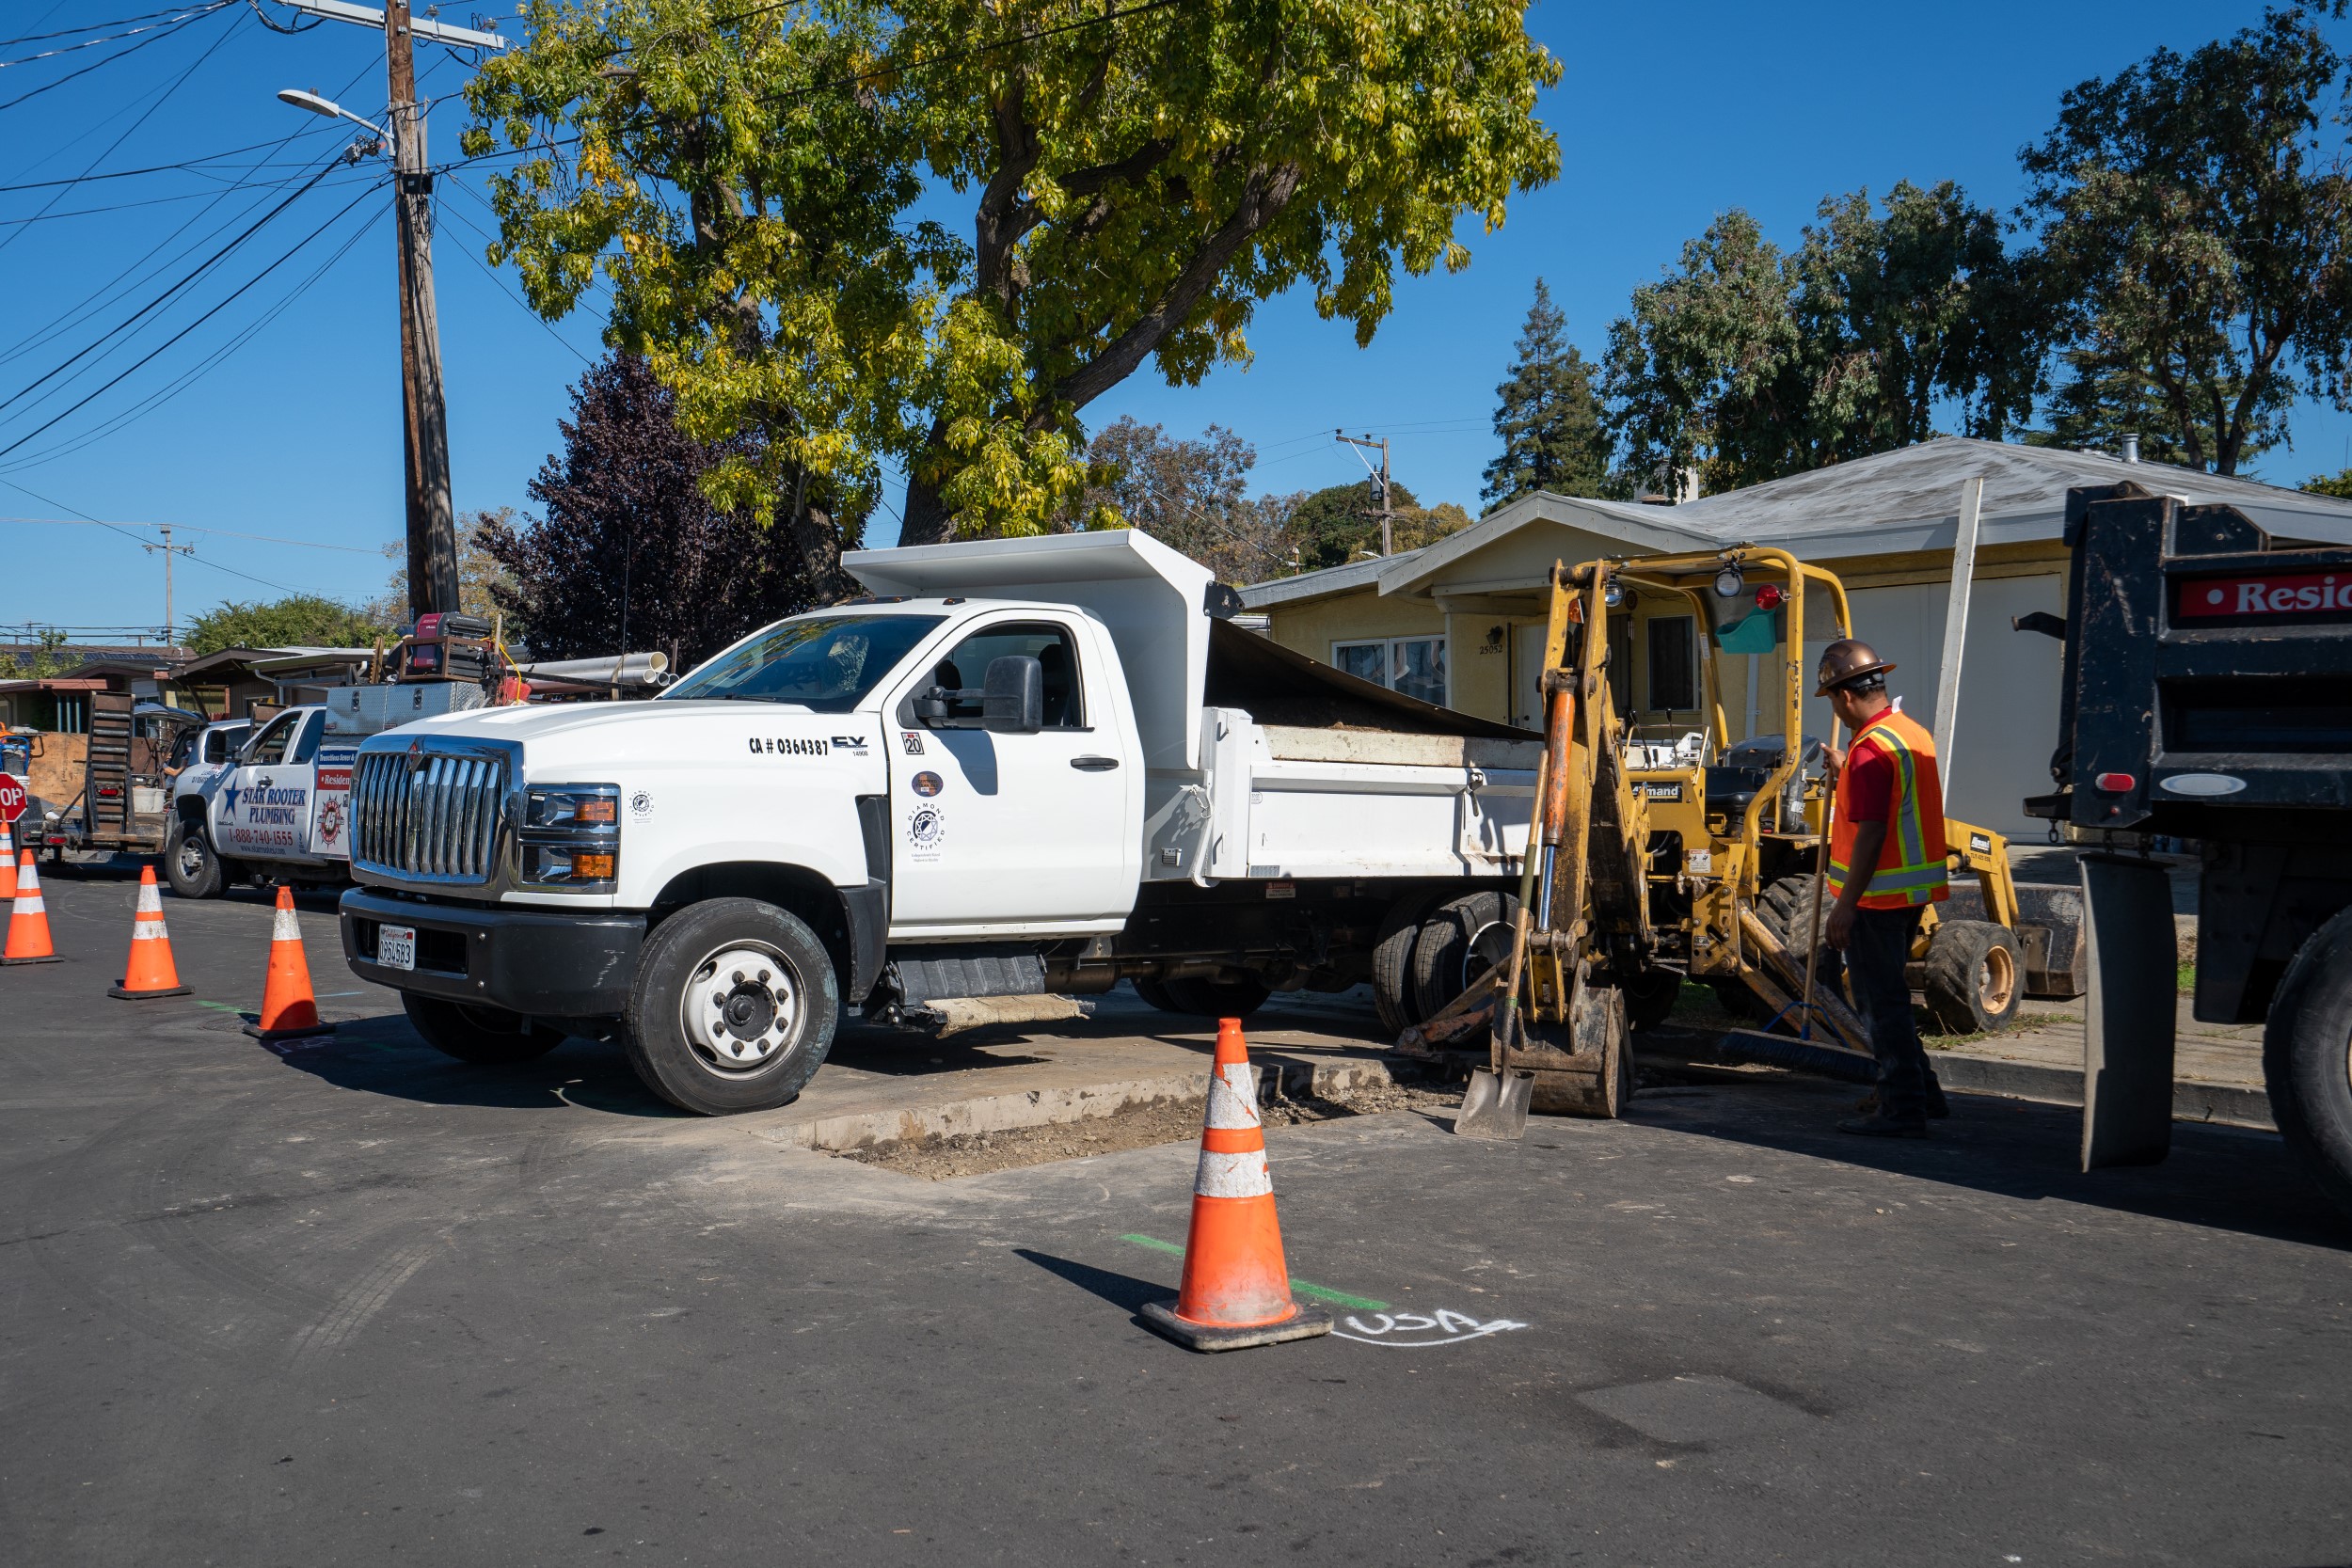 sewer line replacement in progress